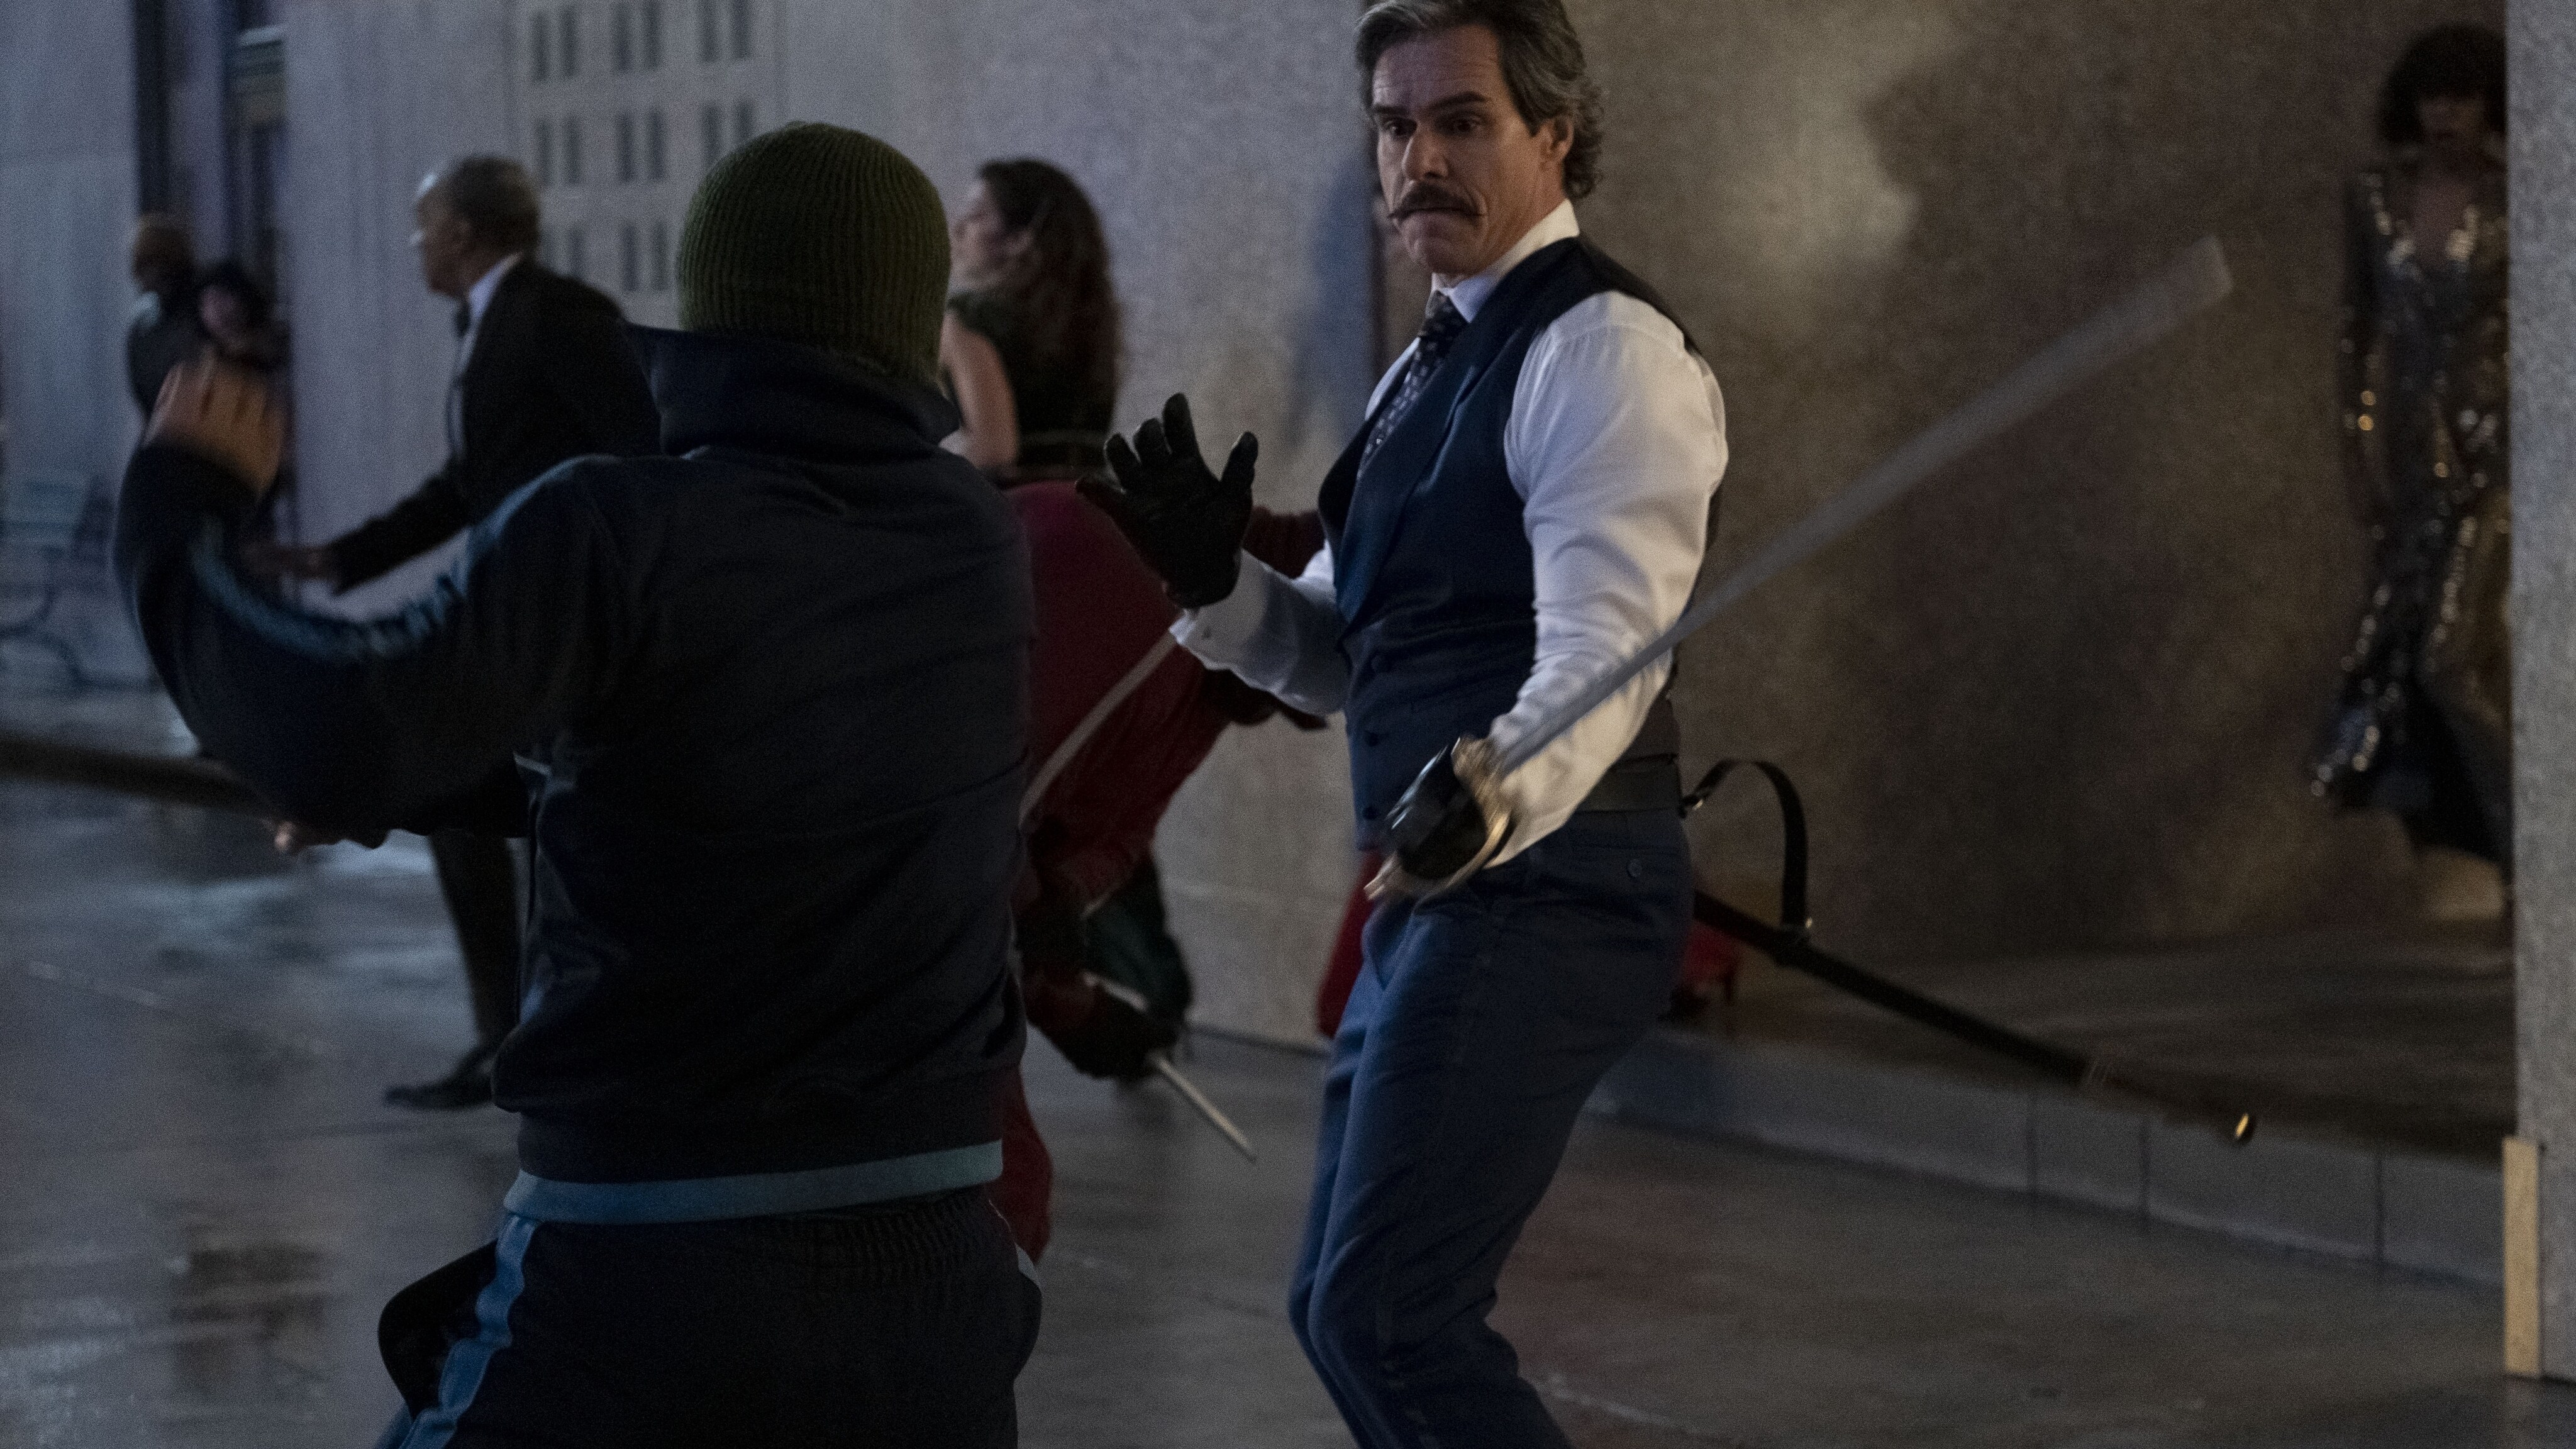 Tony Dalton as Jack Duquesne in Marvel Studios' HAWKEYE. Photo by Chuck Zlotnick. ©Marvel Studios 2021. All Rights Reserved.